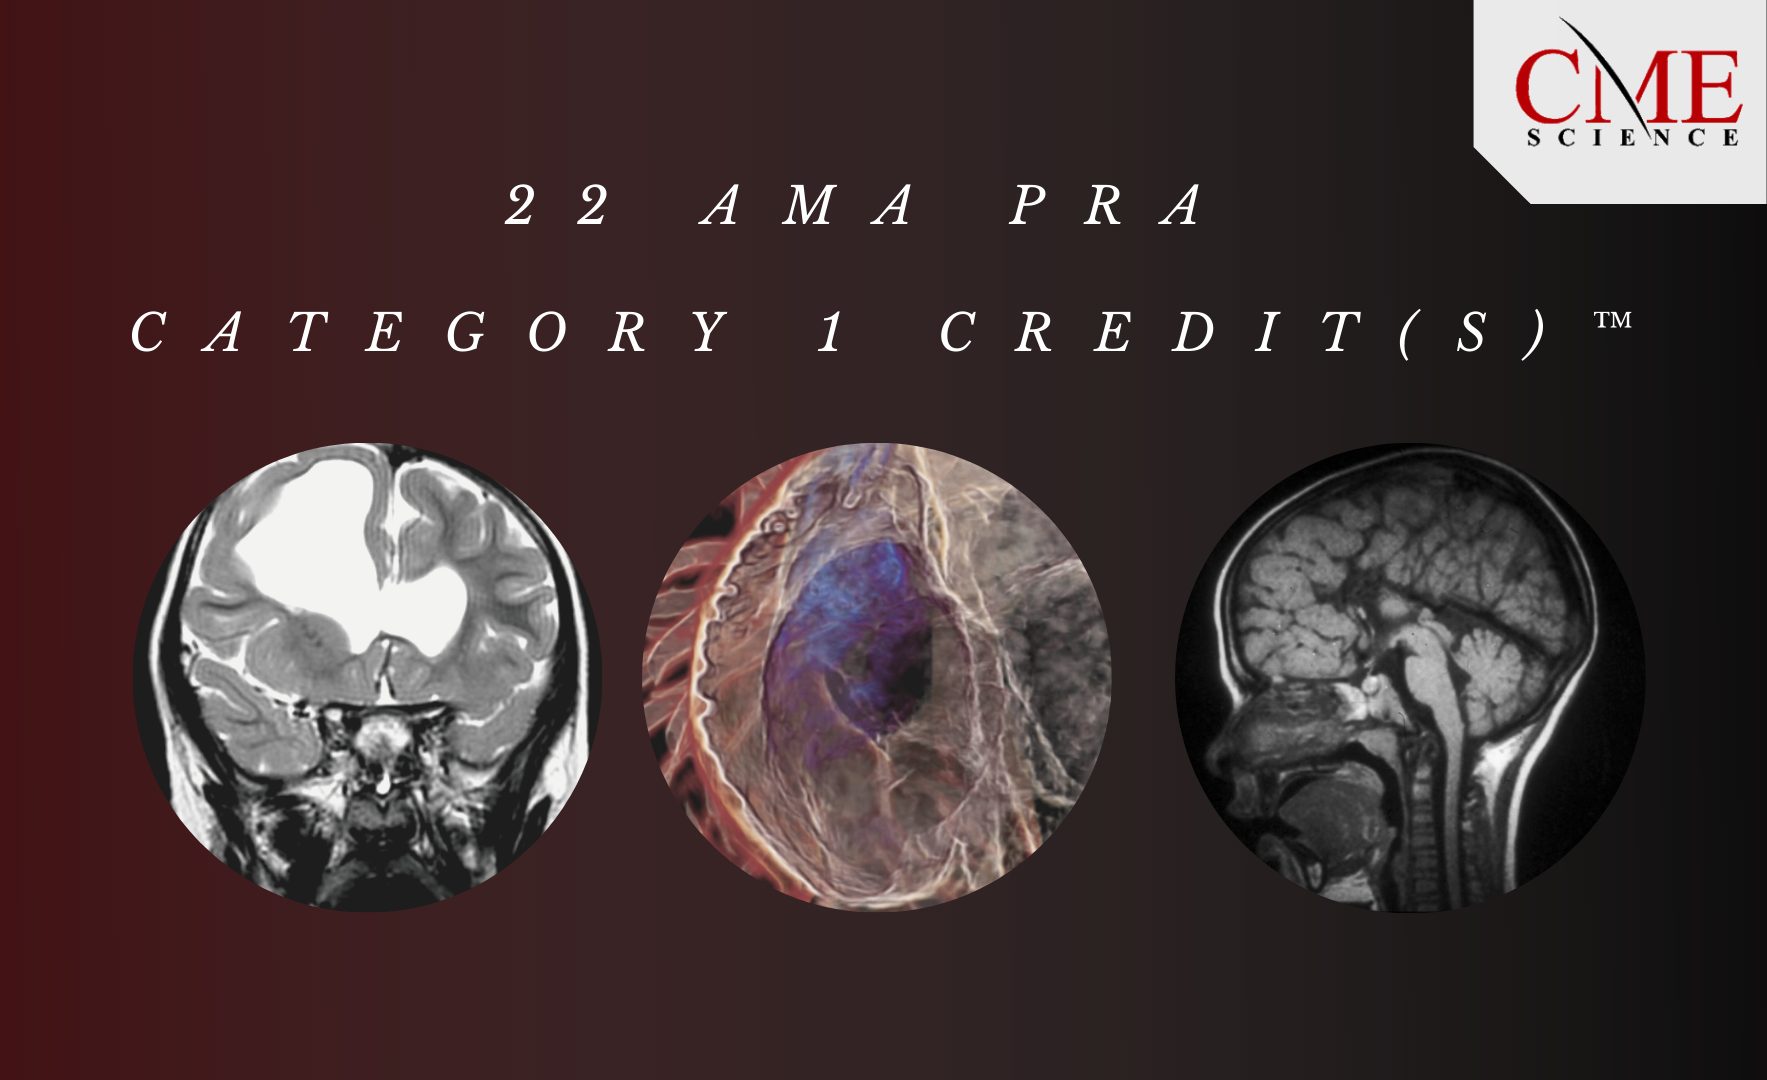 Radiology CME Online Courses & Webinars Available 24/7